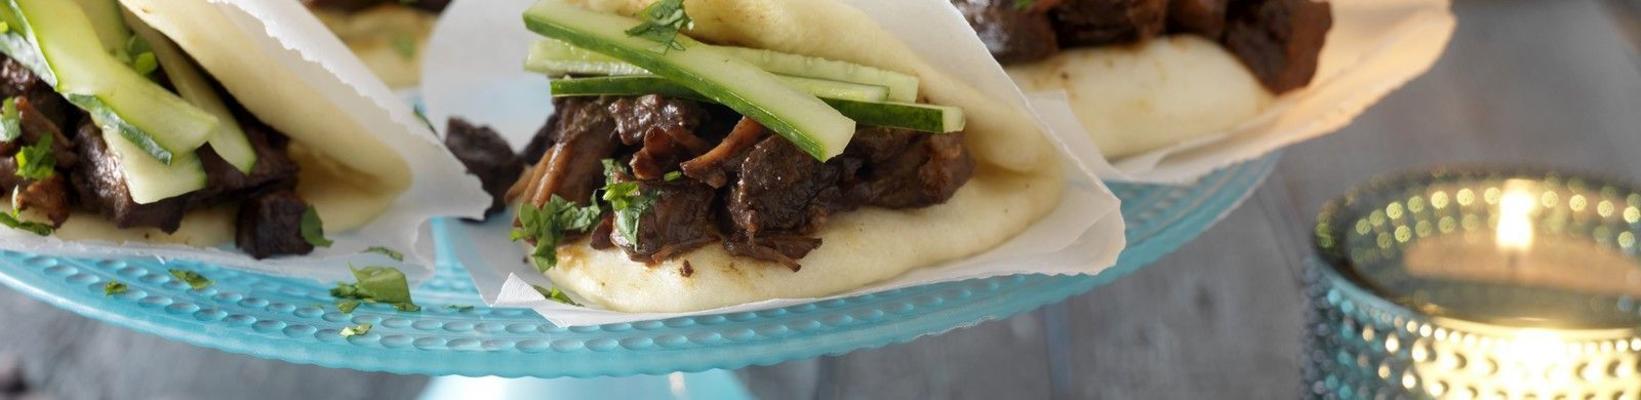 slow roasted pork with steamed buns